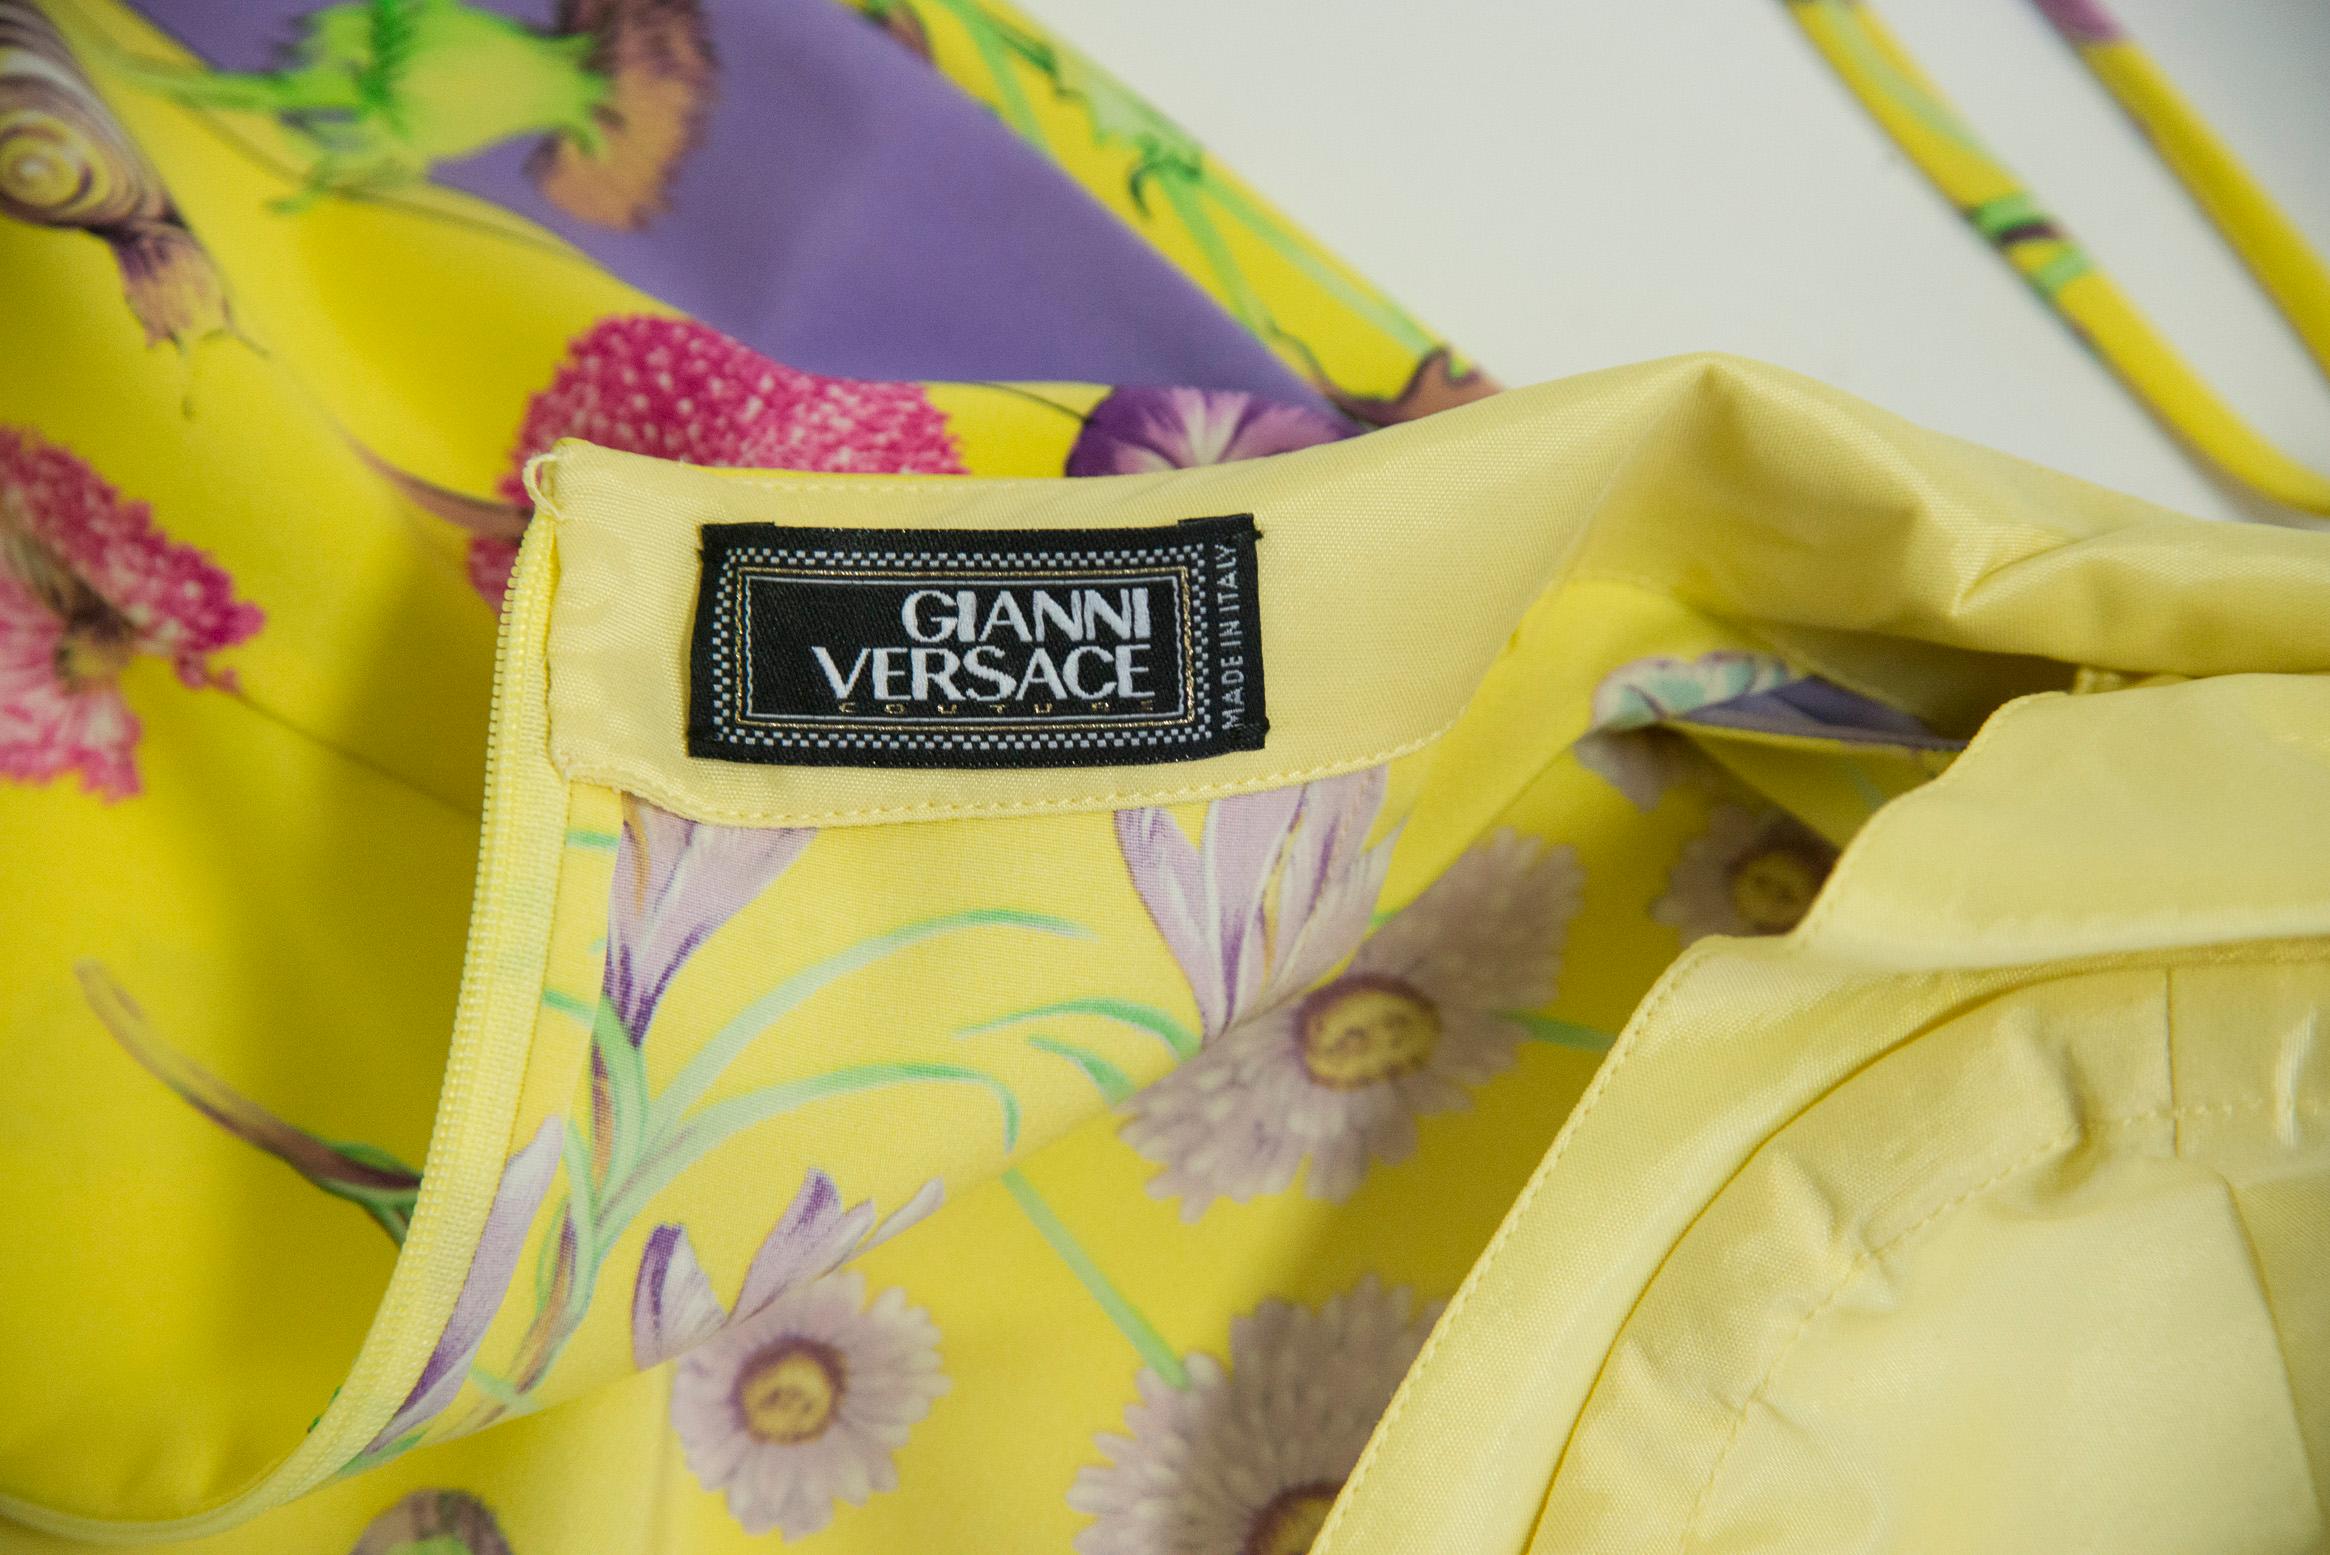 Gianni Versace Couture Printed Halterneck Dress, Circa 1995-1996 For Sale 12